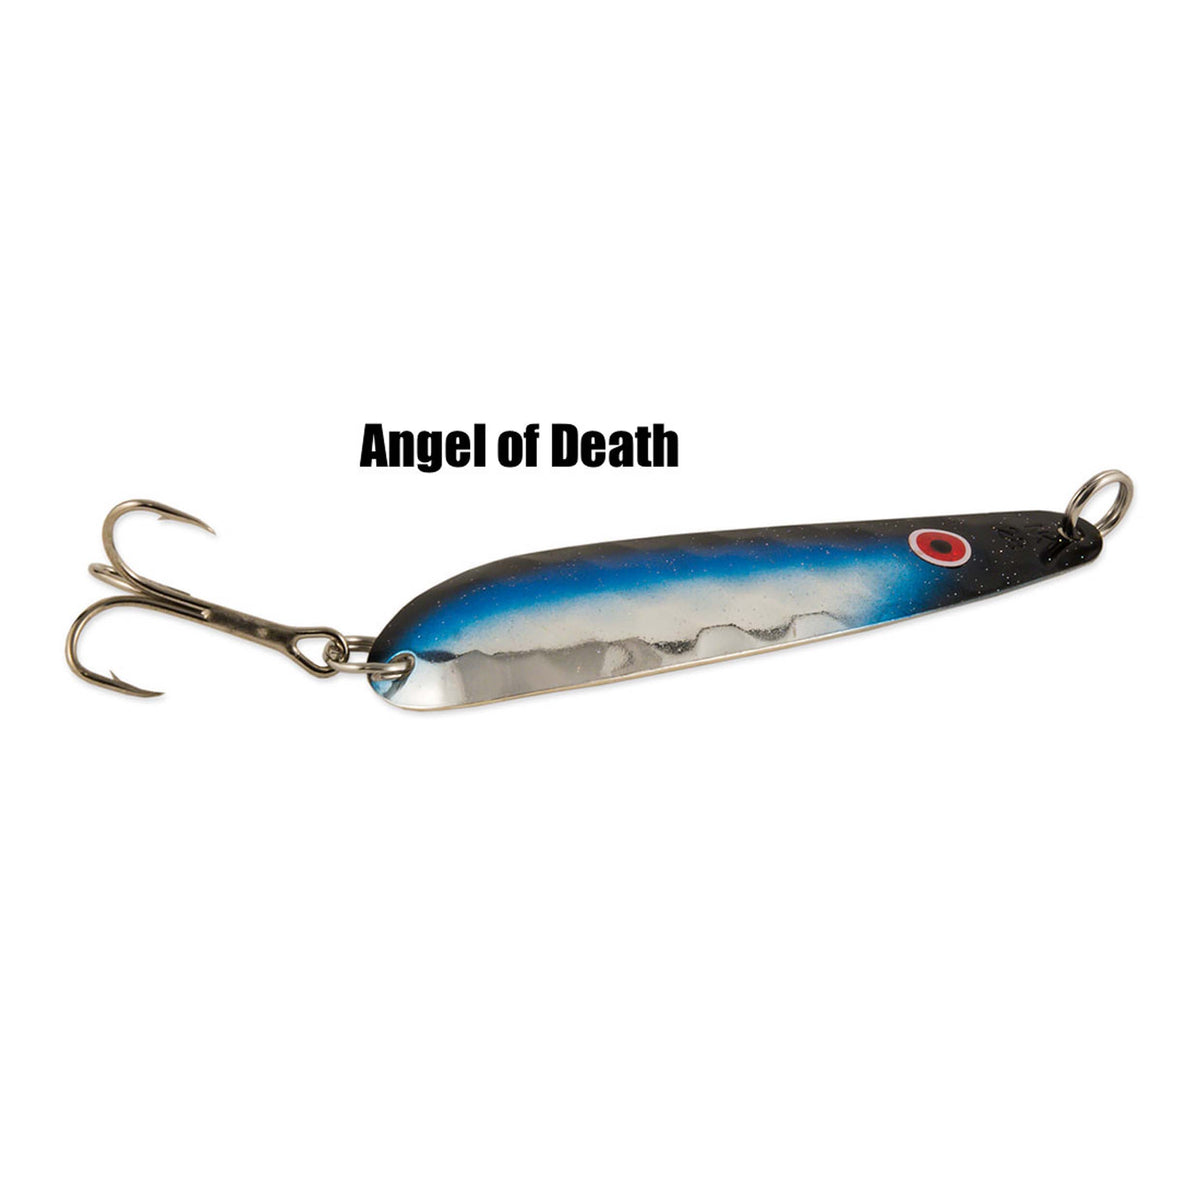 Northern King NK-28 Spoon – Natural Sports - The Fishing Store